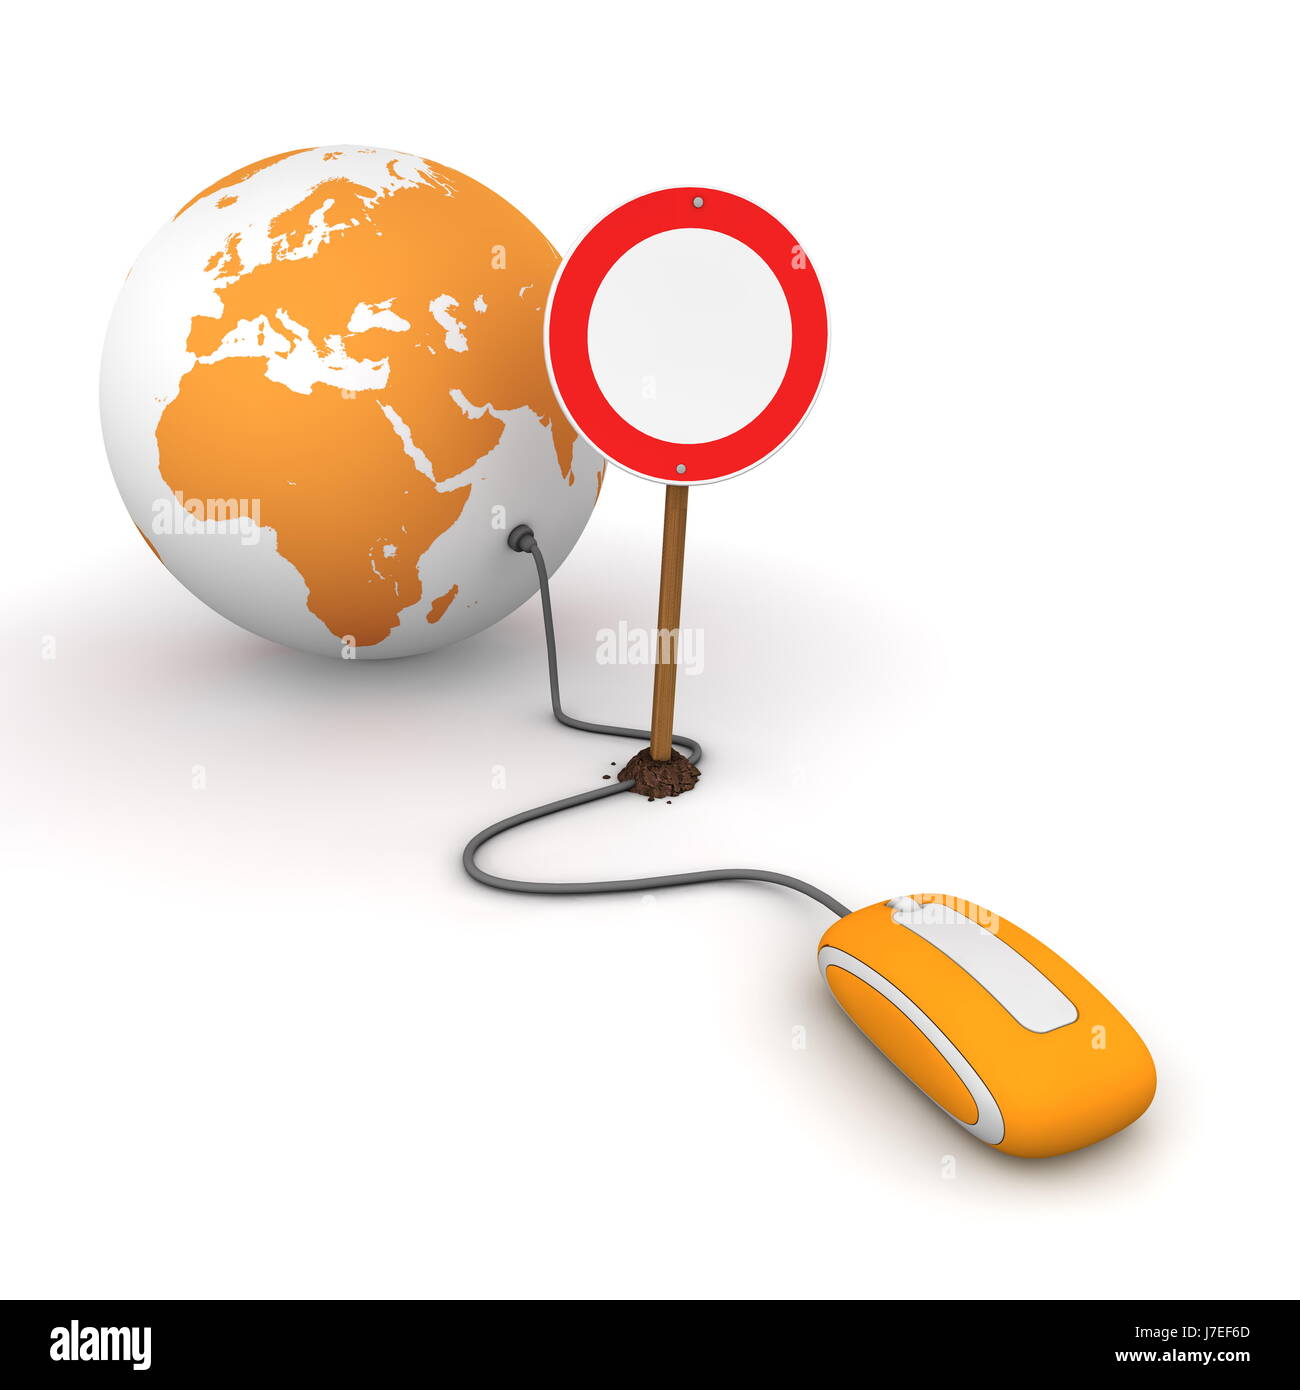 censorship globe planet earth world warning mouse computer mouse internet www Stock Photo